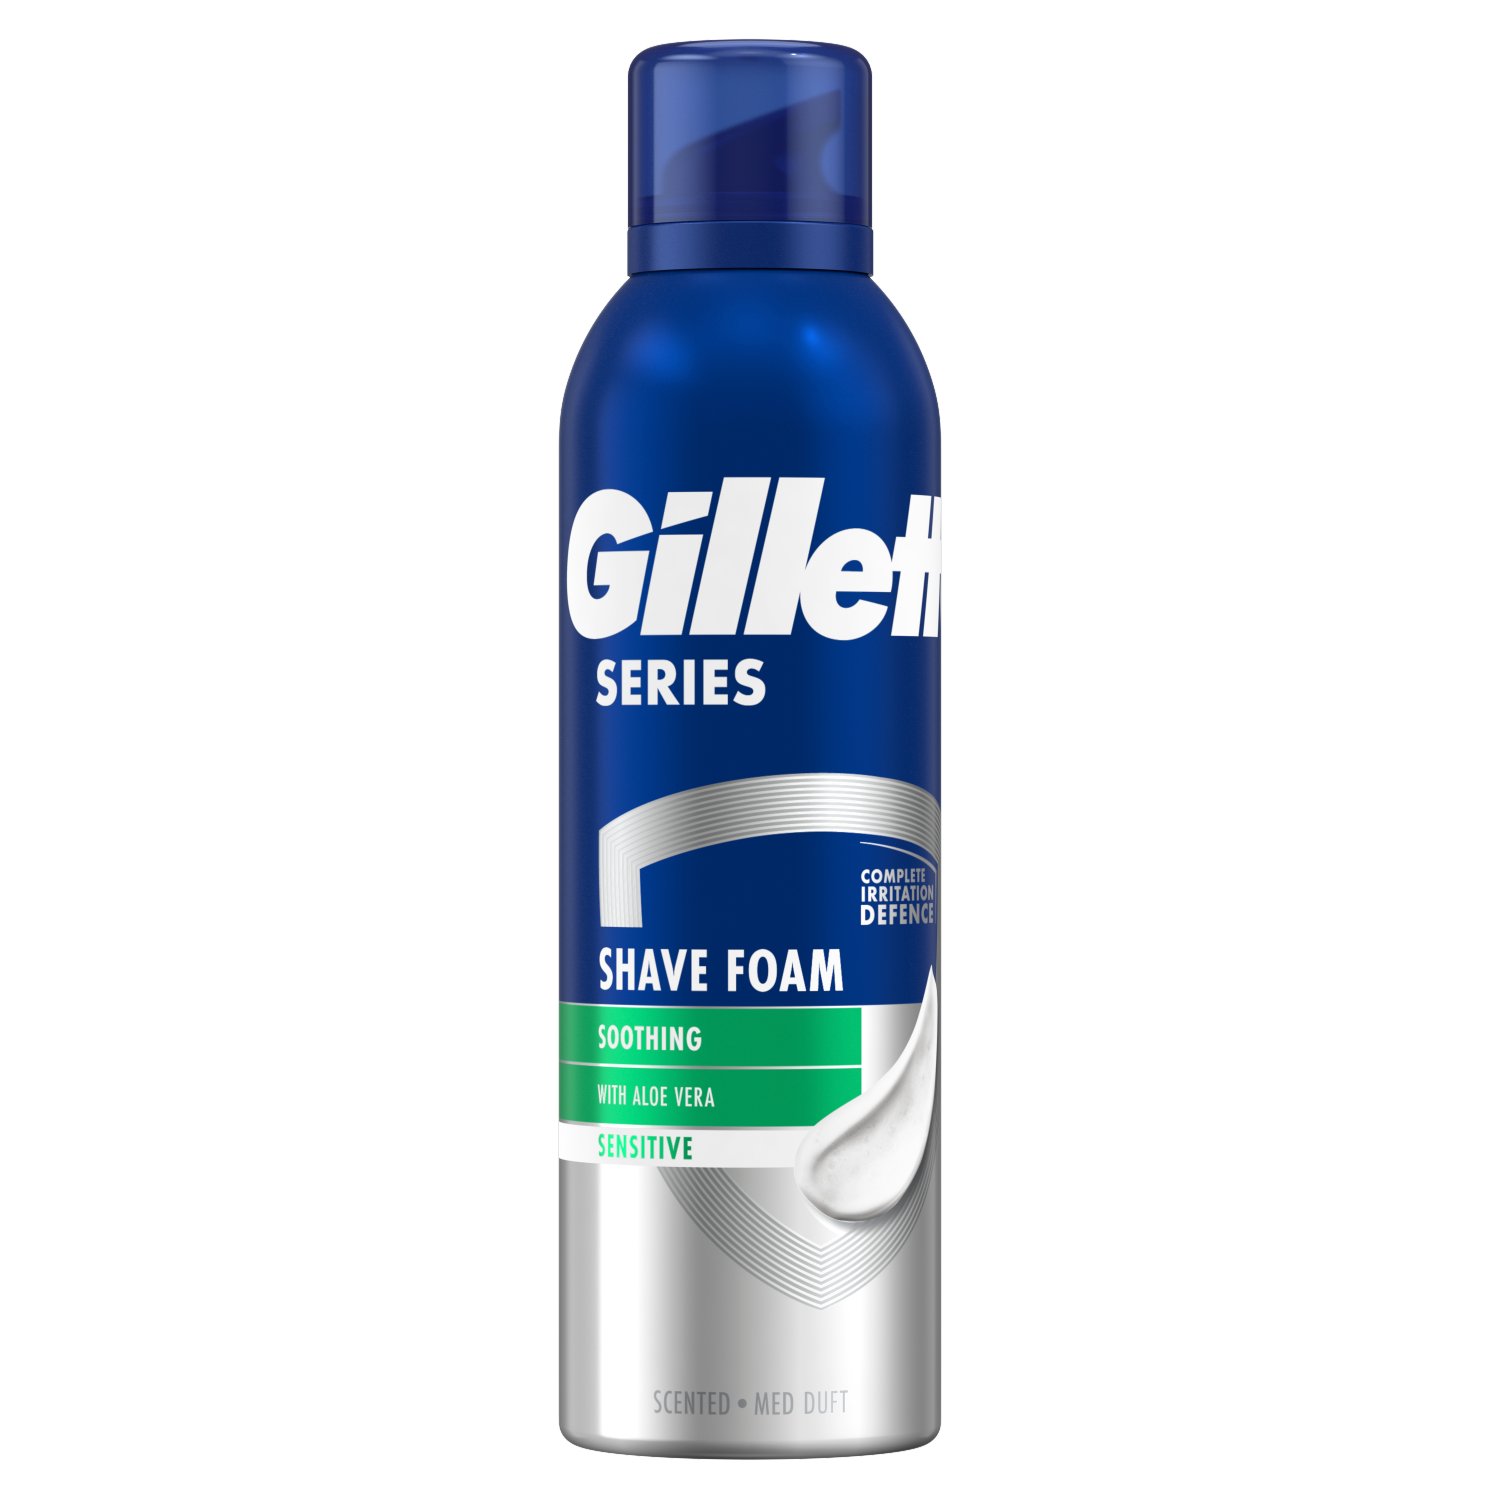 The Gillette Series Shave Foam for Sensitive Skins provides complete defence against shaving irritation, reducing cuts, redness, burning, stinging and tightness. The foam cools to soothe your skin with a refreshing action while you're shaving—and it's enriched with Aloe Vera. Its unique formula has extra lubricants for a smooth shave—in short: it's few tugs and pulls for a more comfortable shear. Show the world your best face with Gillette Series Shave Foam, made for men by the World’s No.1 Shave Gel & Foam brand.